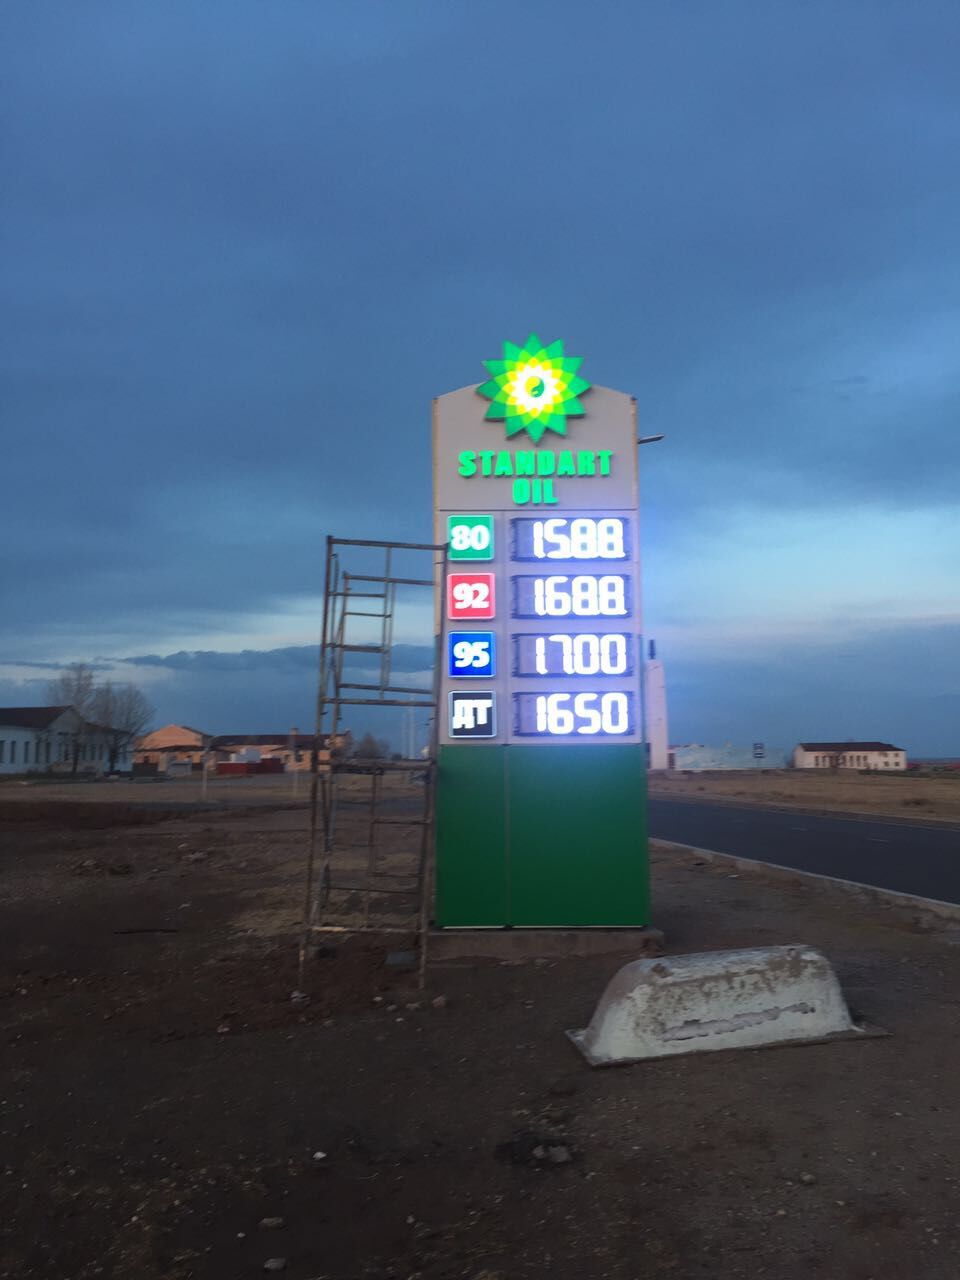 Hidly LED Oil Price Signs in Mongolia